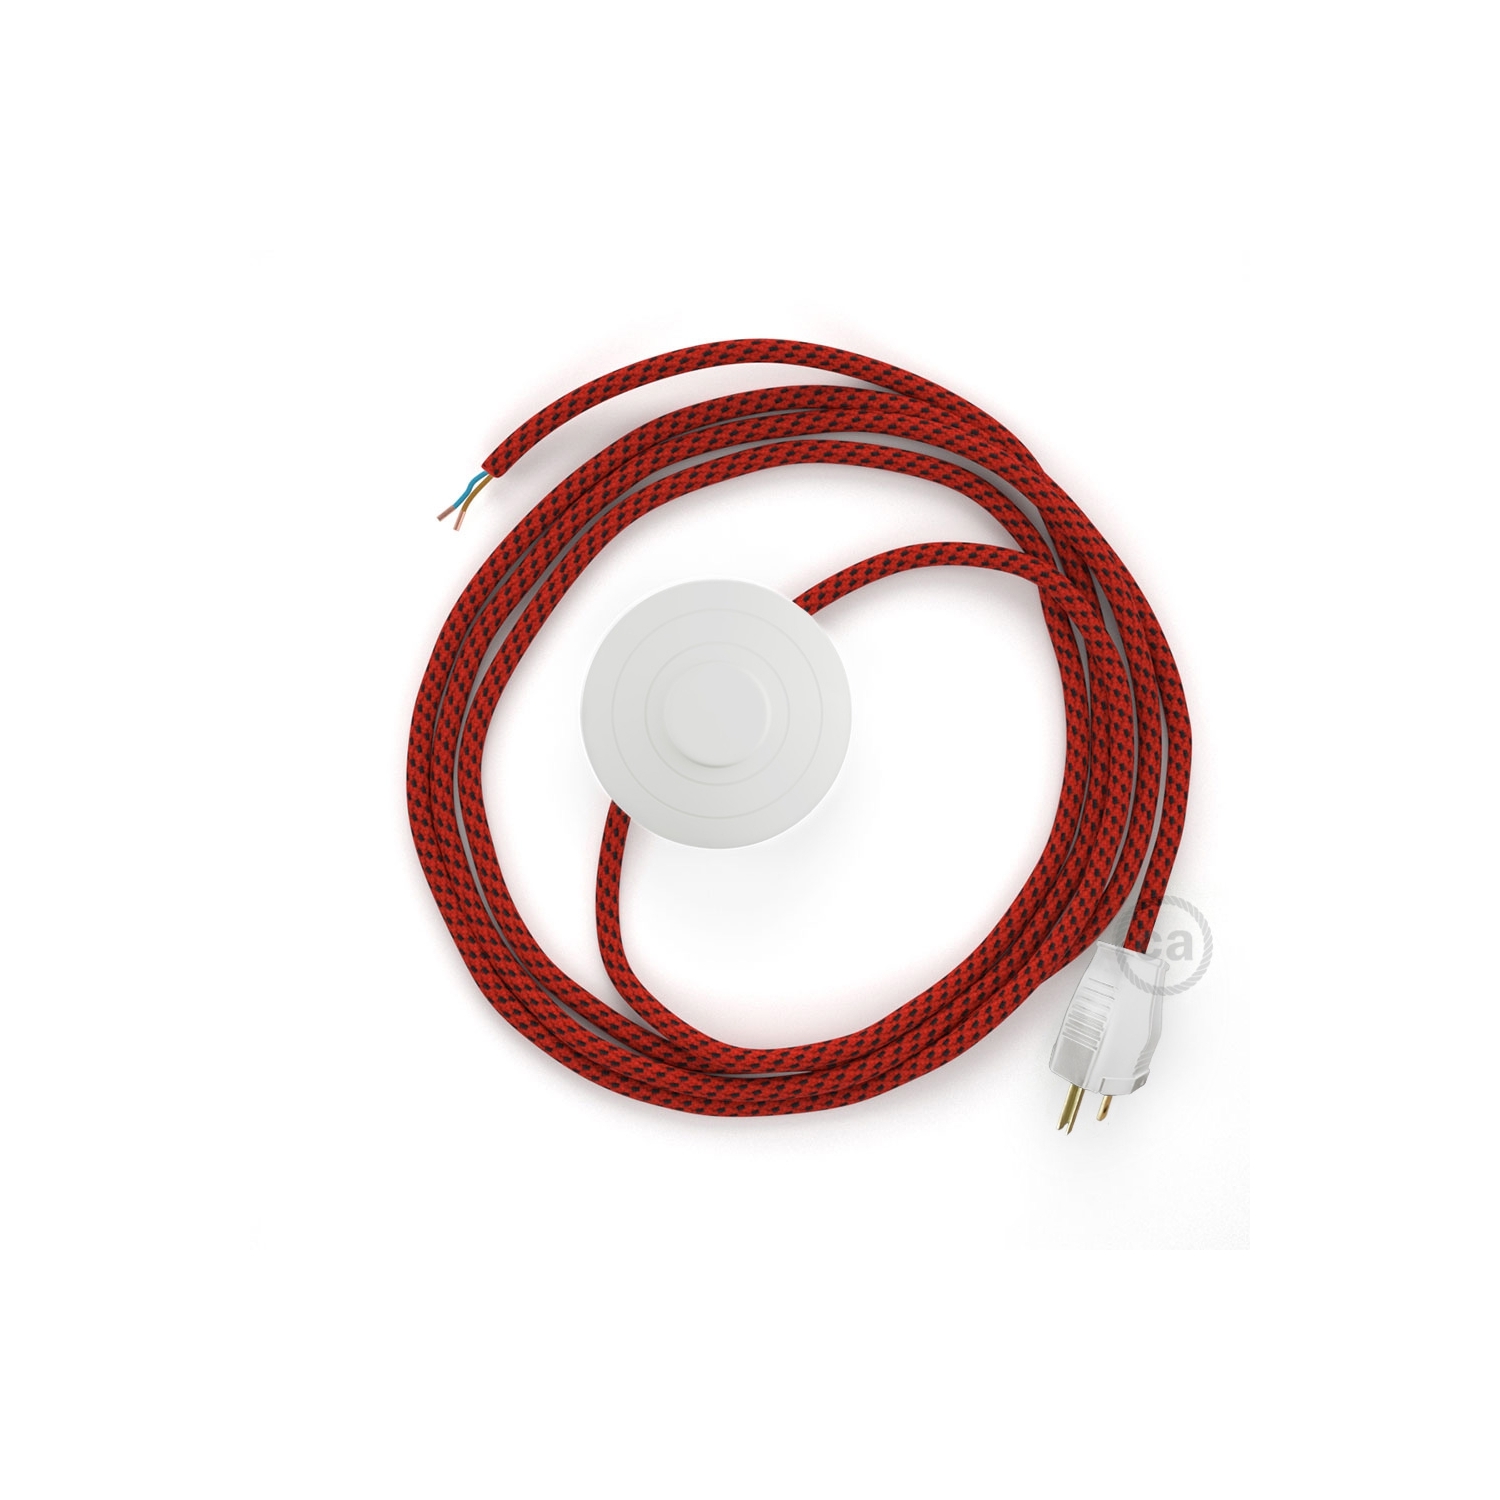 Power Cord with foot switch, RT94 Red & Black Tracer - Choose color of switch/plug